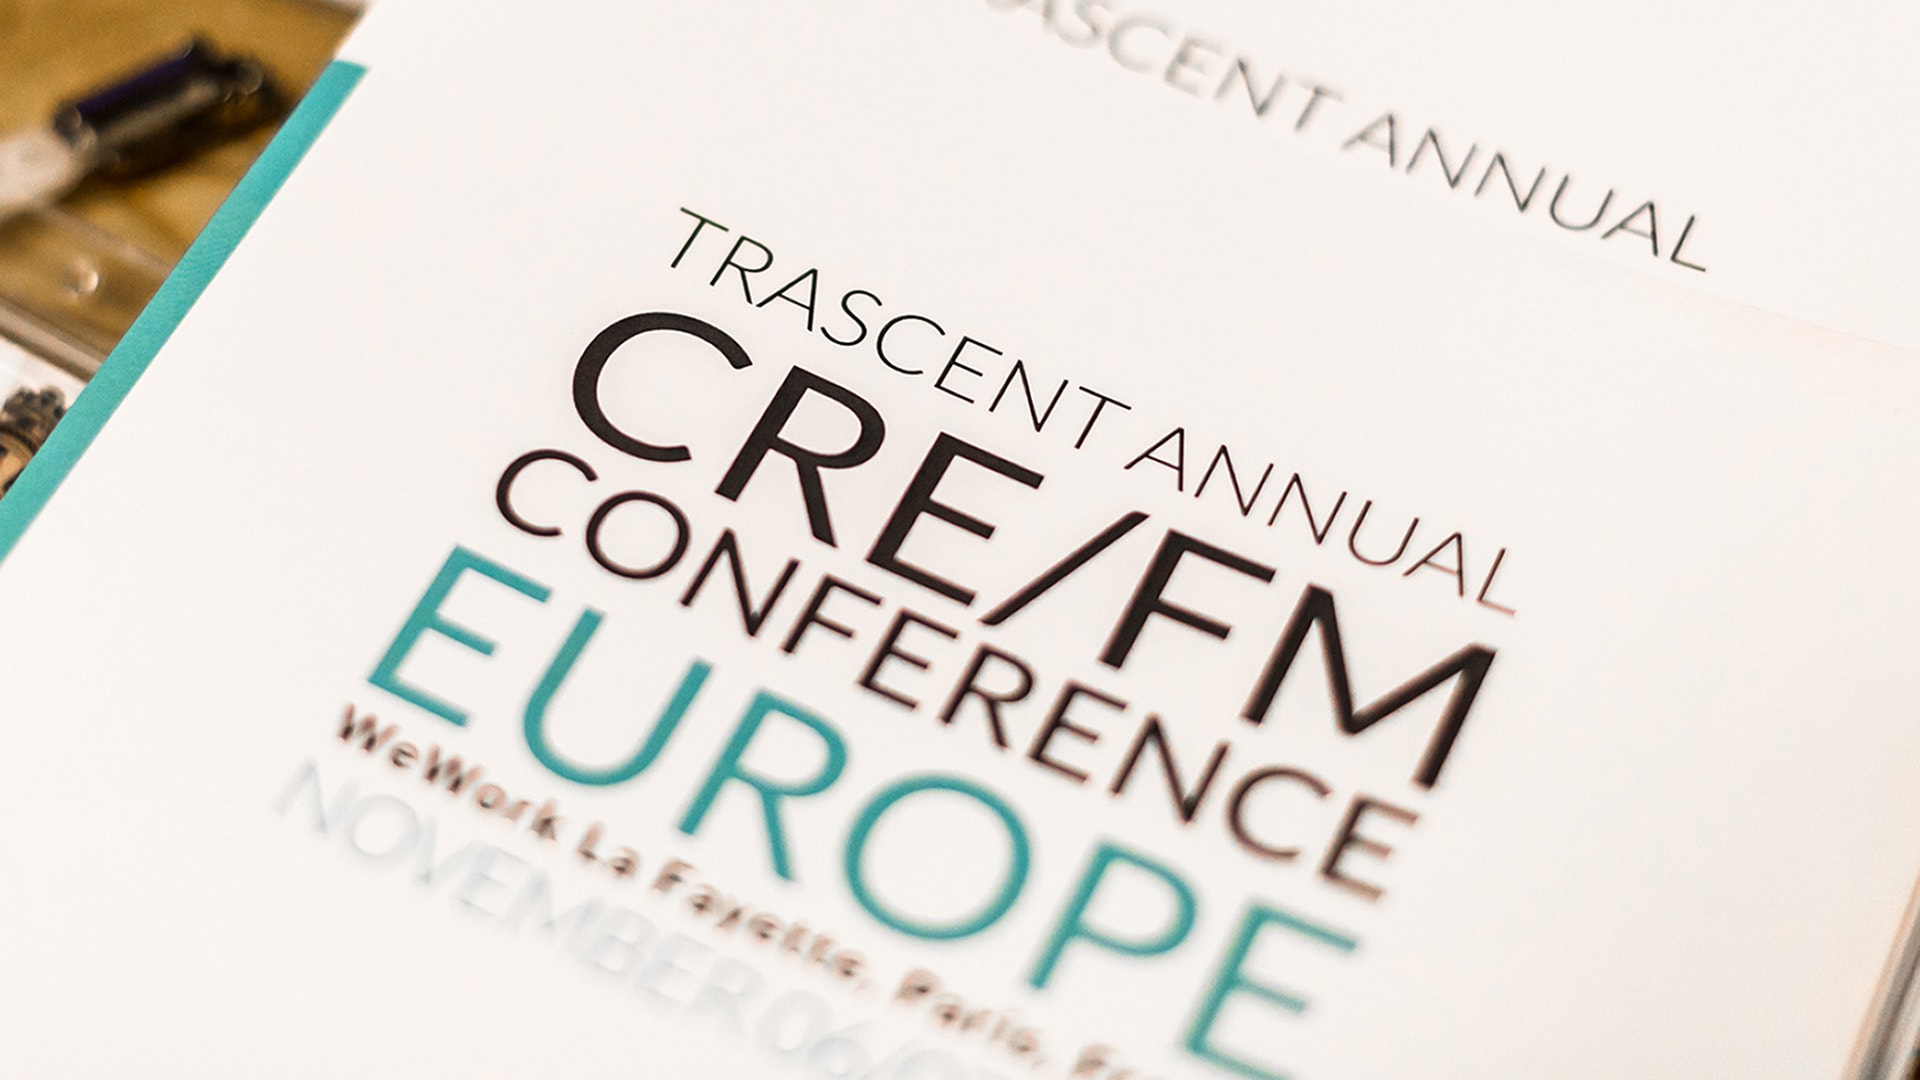 A close-up photographic section of a printed Trascent Europe Conference Brochure